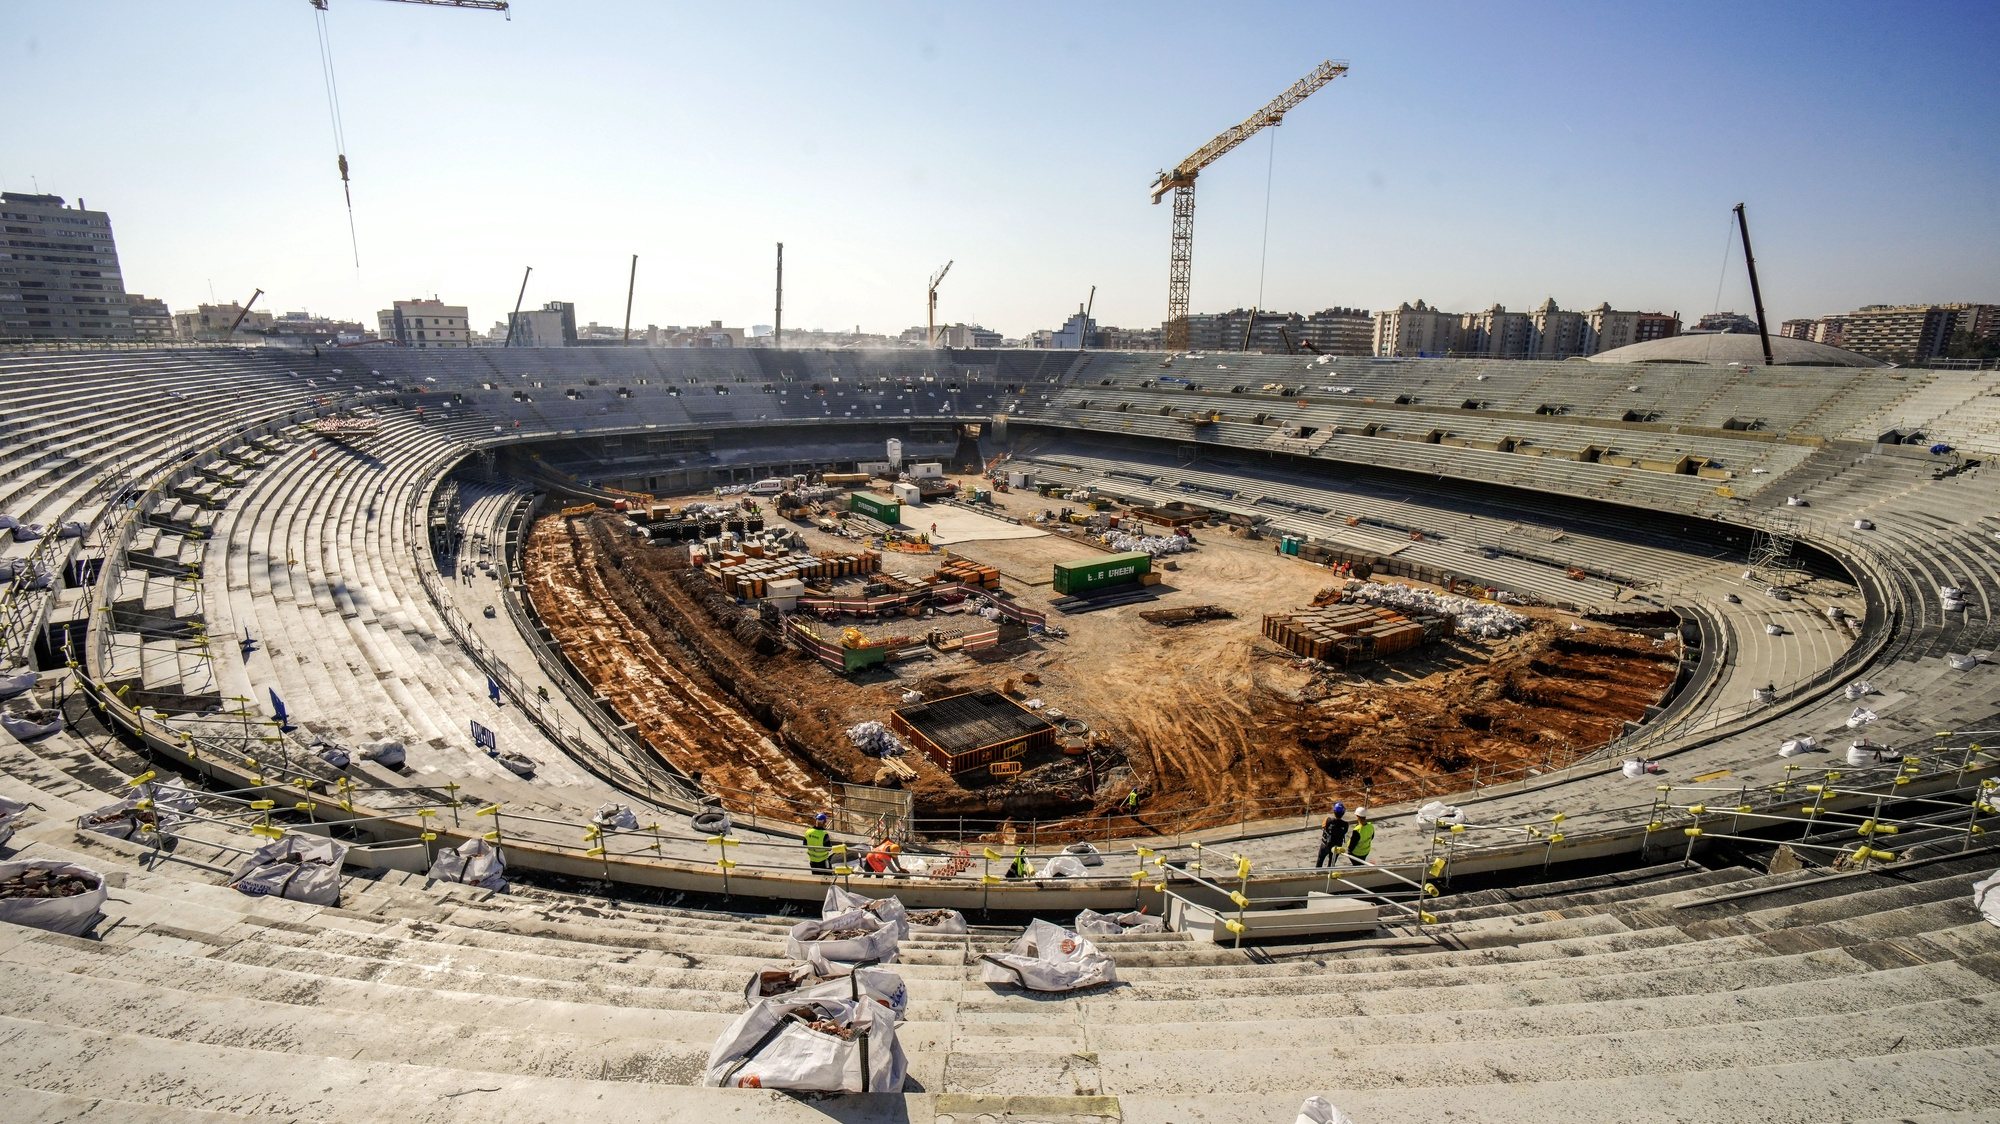 epa11139265 A general view of renovation works at the Camp Nou stadium in Barcelona, Spain, 09 February 2024. Camp Nou, branded as Spotify Camp Nou, is under renovation and the remodeling works are expected to be completed in the summer of 2026.  EPA/ENRIC FONTCUBERTA